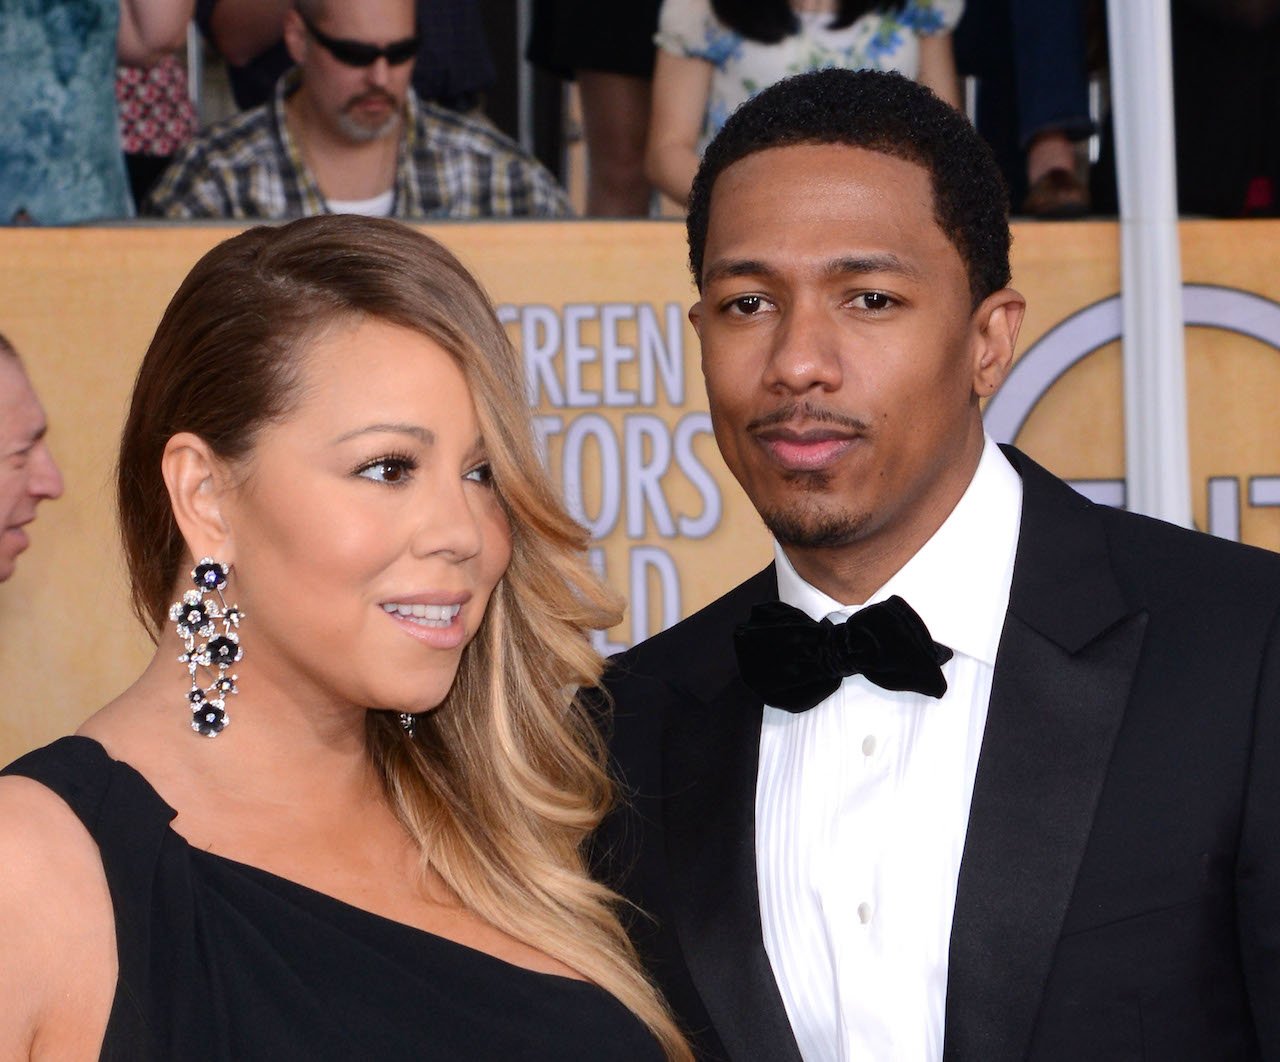 Mariah Carey and Nick Cannon on red carpet